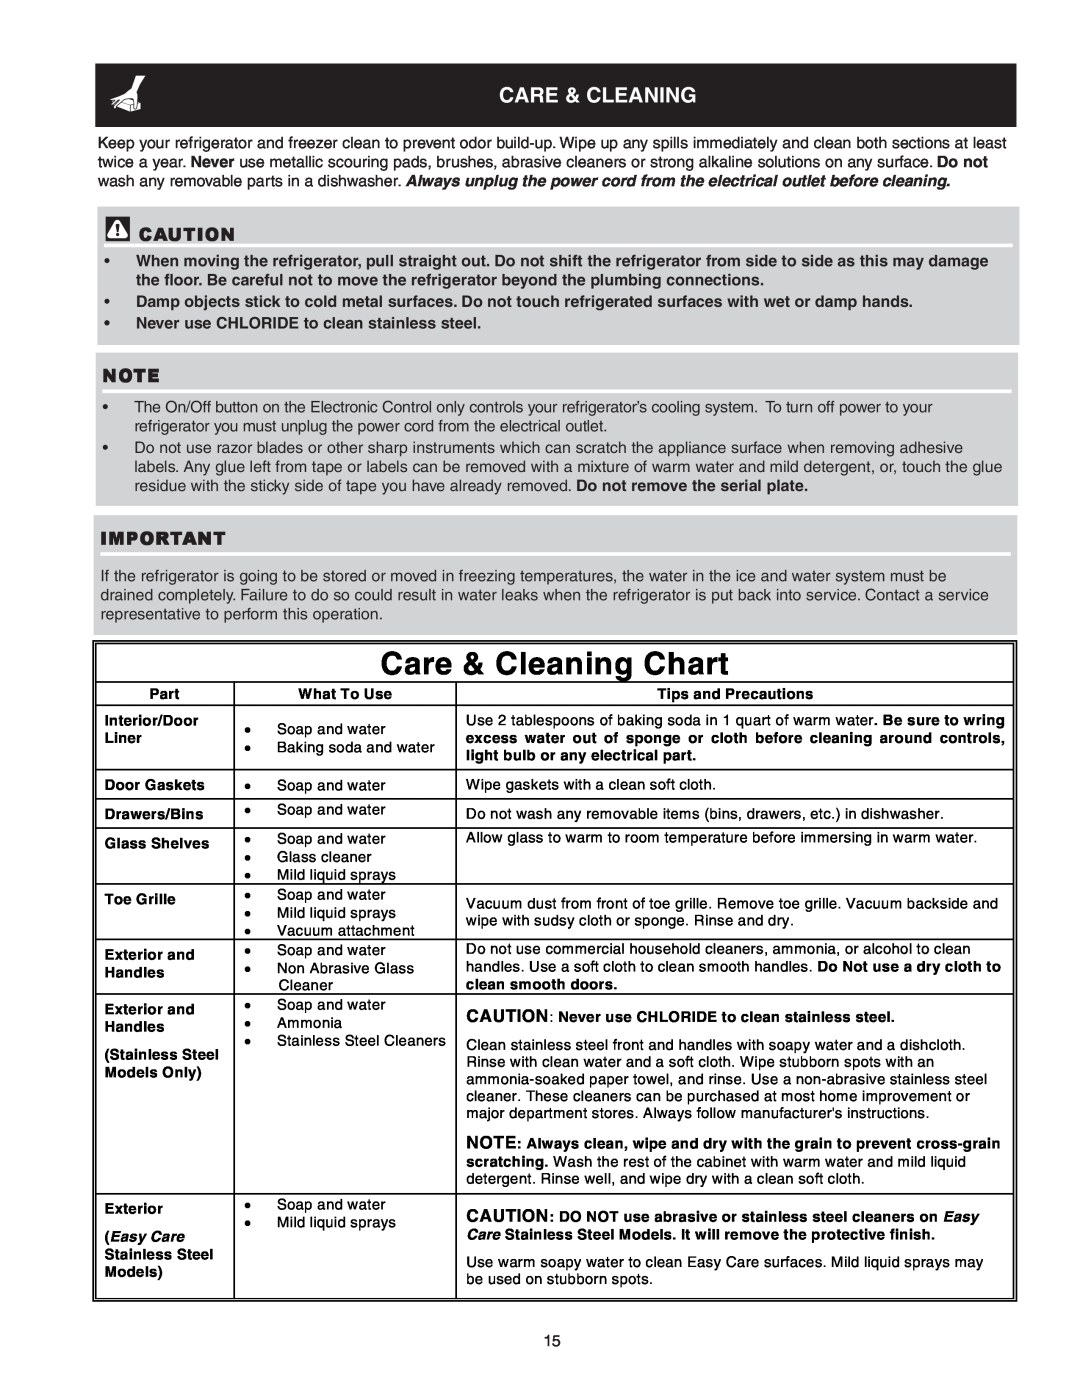 Frigidaire FRS6R3JW4 important safety instructions Care & Cleaning Chart 